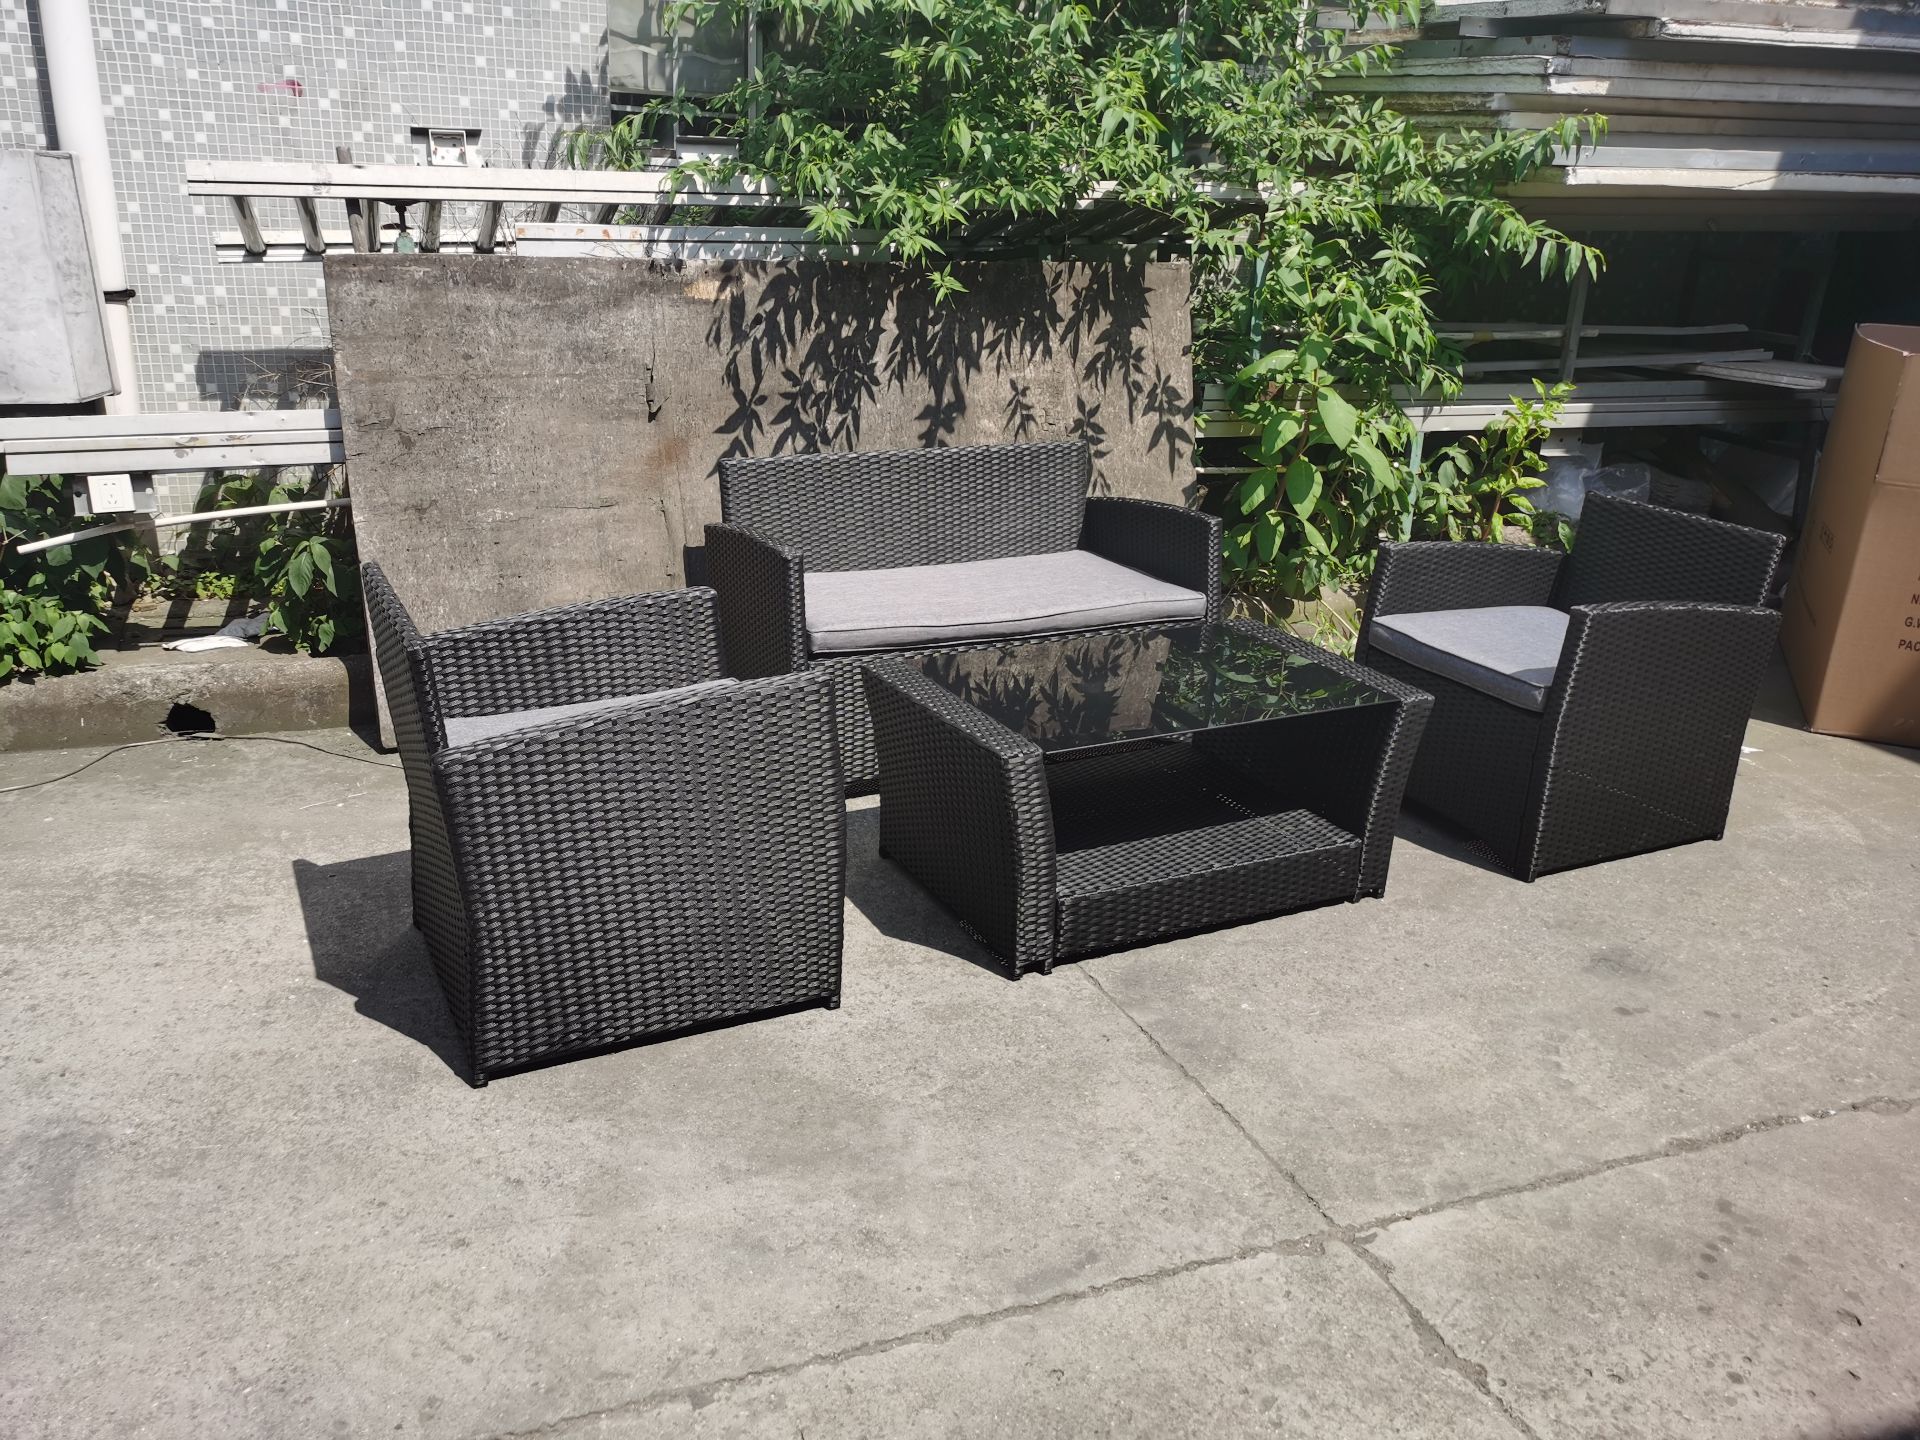 * 1 xBrand New - In Cardboard Boxes - Garden Rattan Furntiure Set. Black Wick with Grey Cushions. - Image 3 of 3